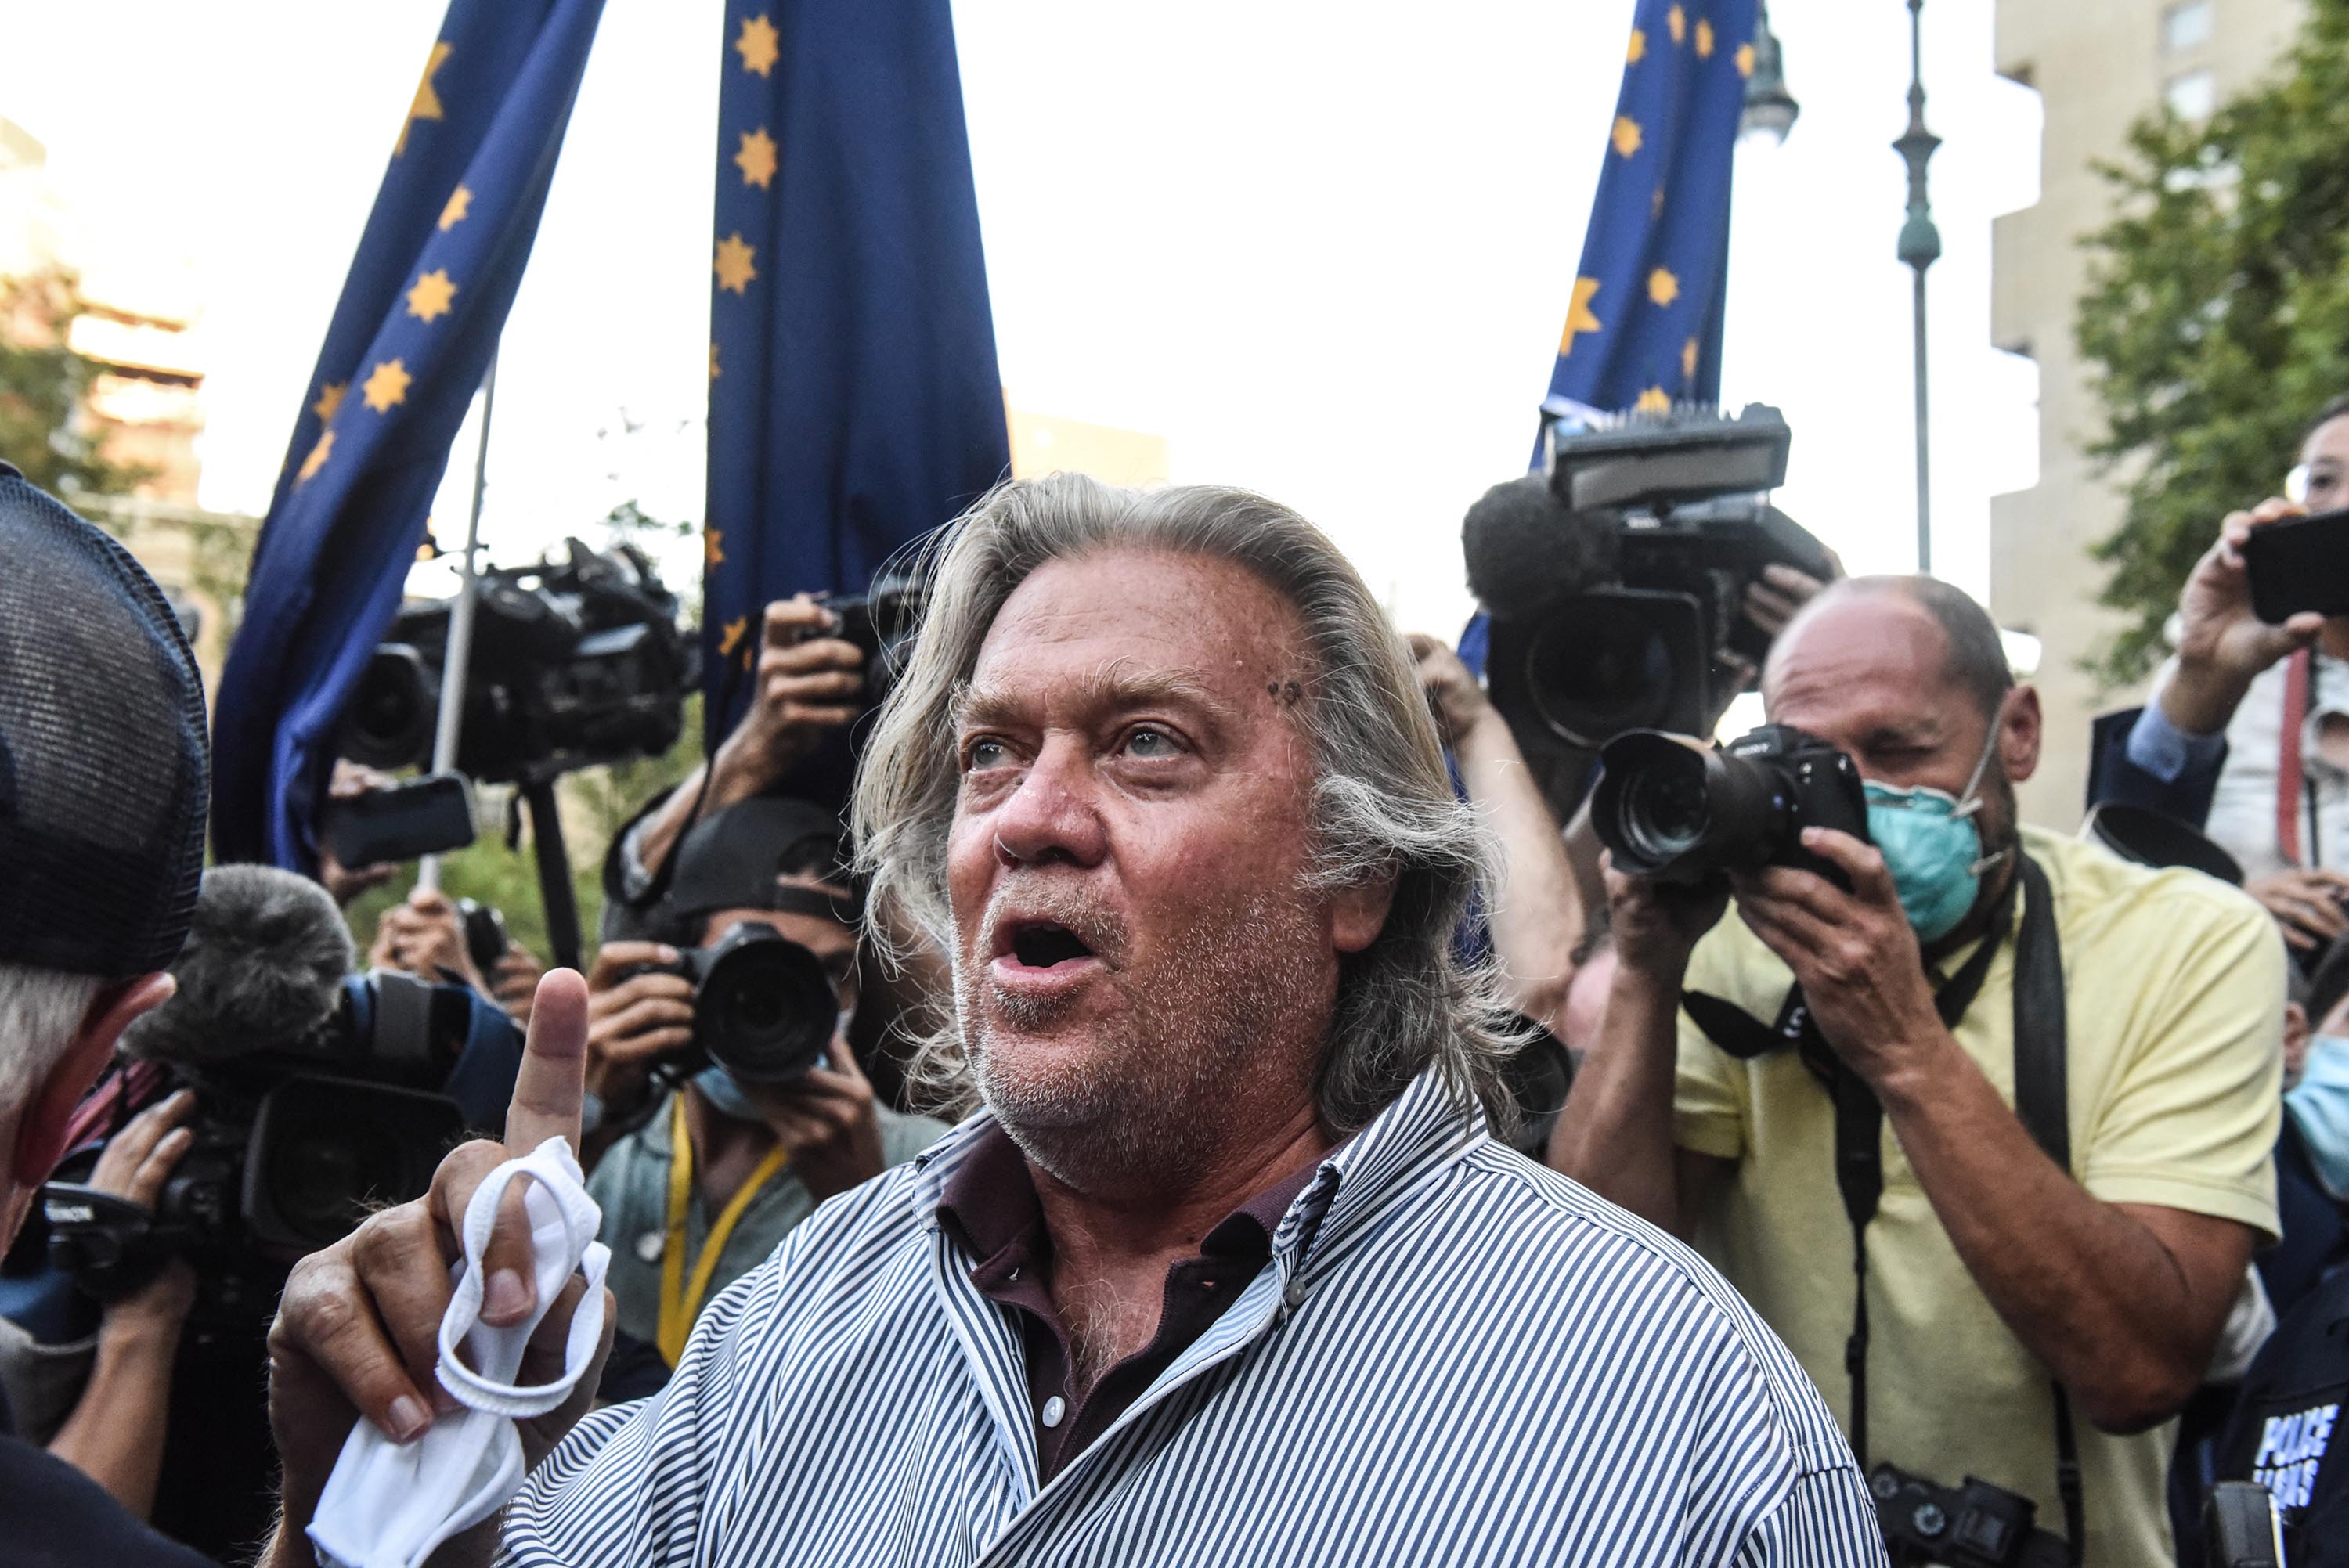 Bannon exits the Manhattan Federal Court on August 20, 2020 in New York City.